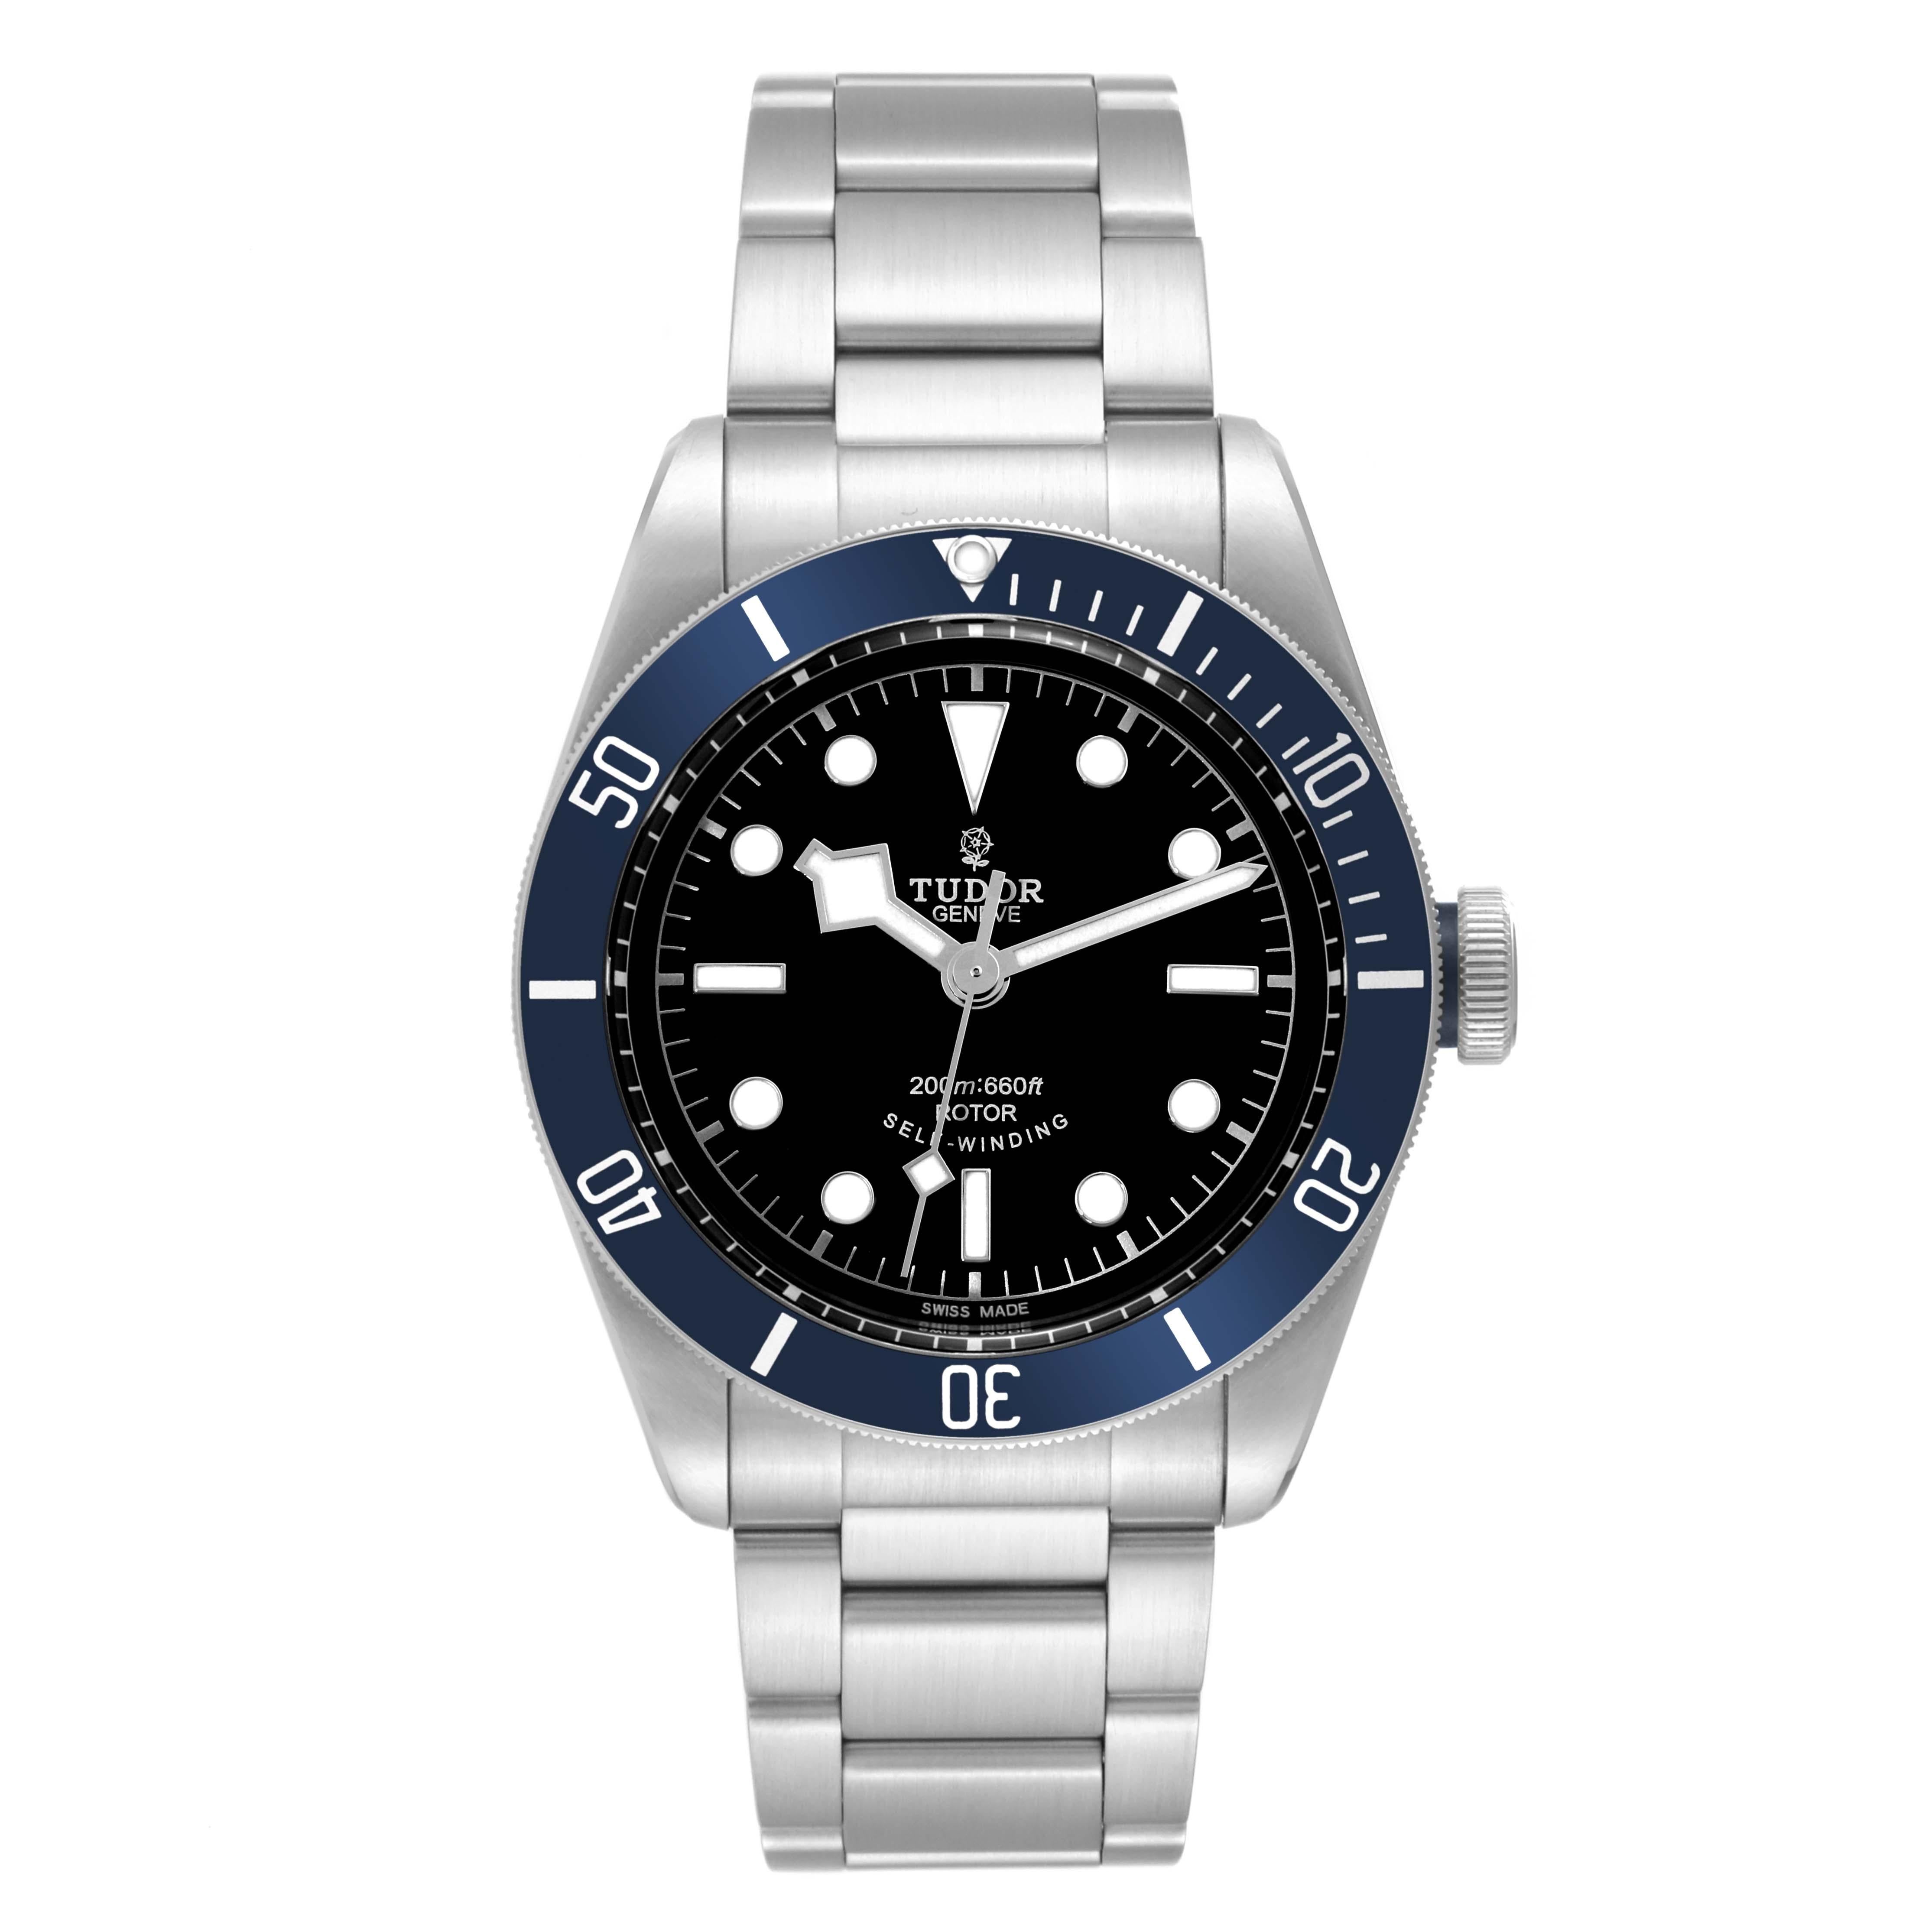 Tudor Heritage Black Bay Blue Bezel Steel Watch 79220B Box Card. Automatic self-winding movement with chronograph function. Stainless steel oyster case 41.0 mm in diameter. Tudor logo on crown. Blue unidirectional rotating tachymeter bezel. Scratch